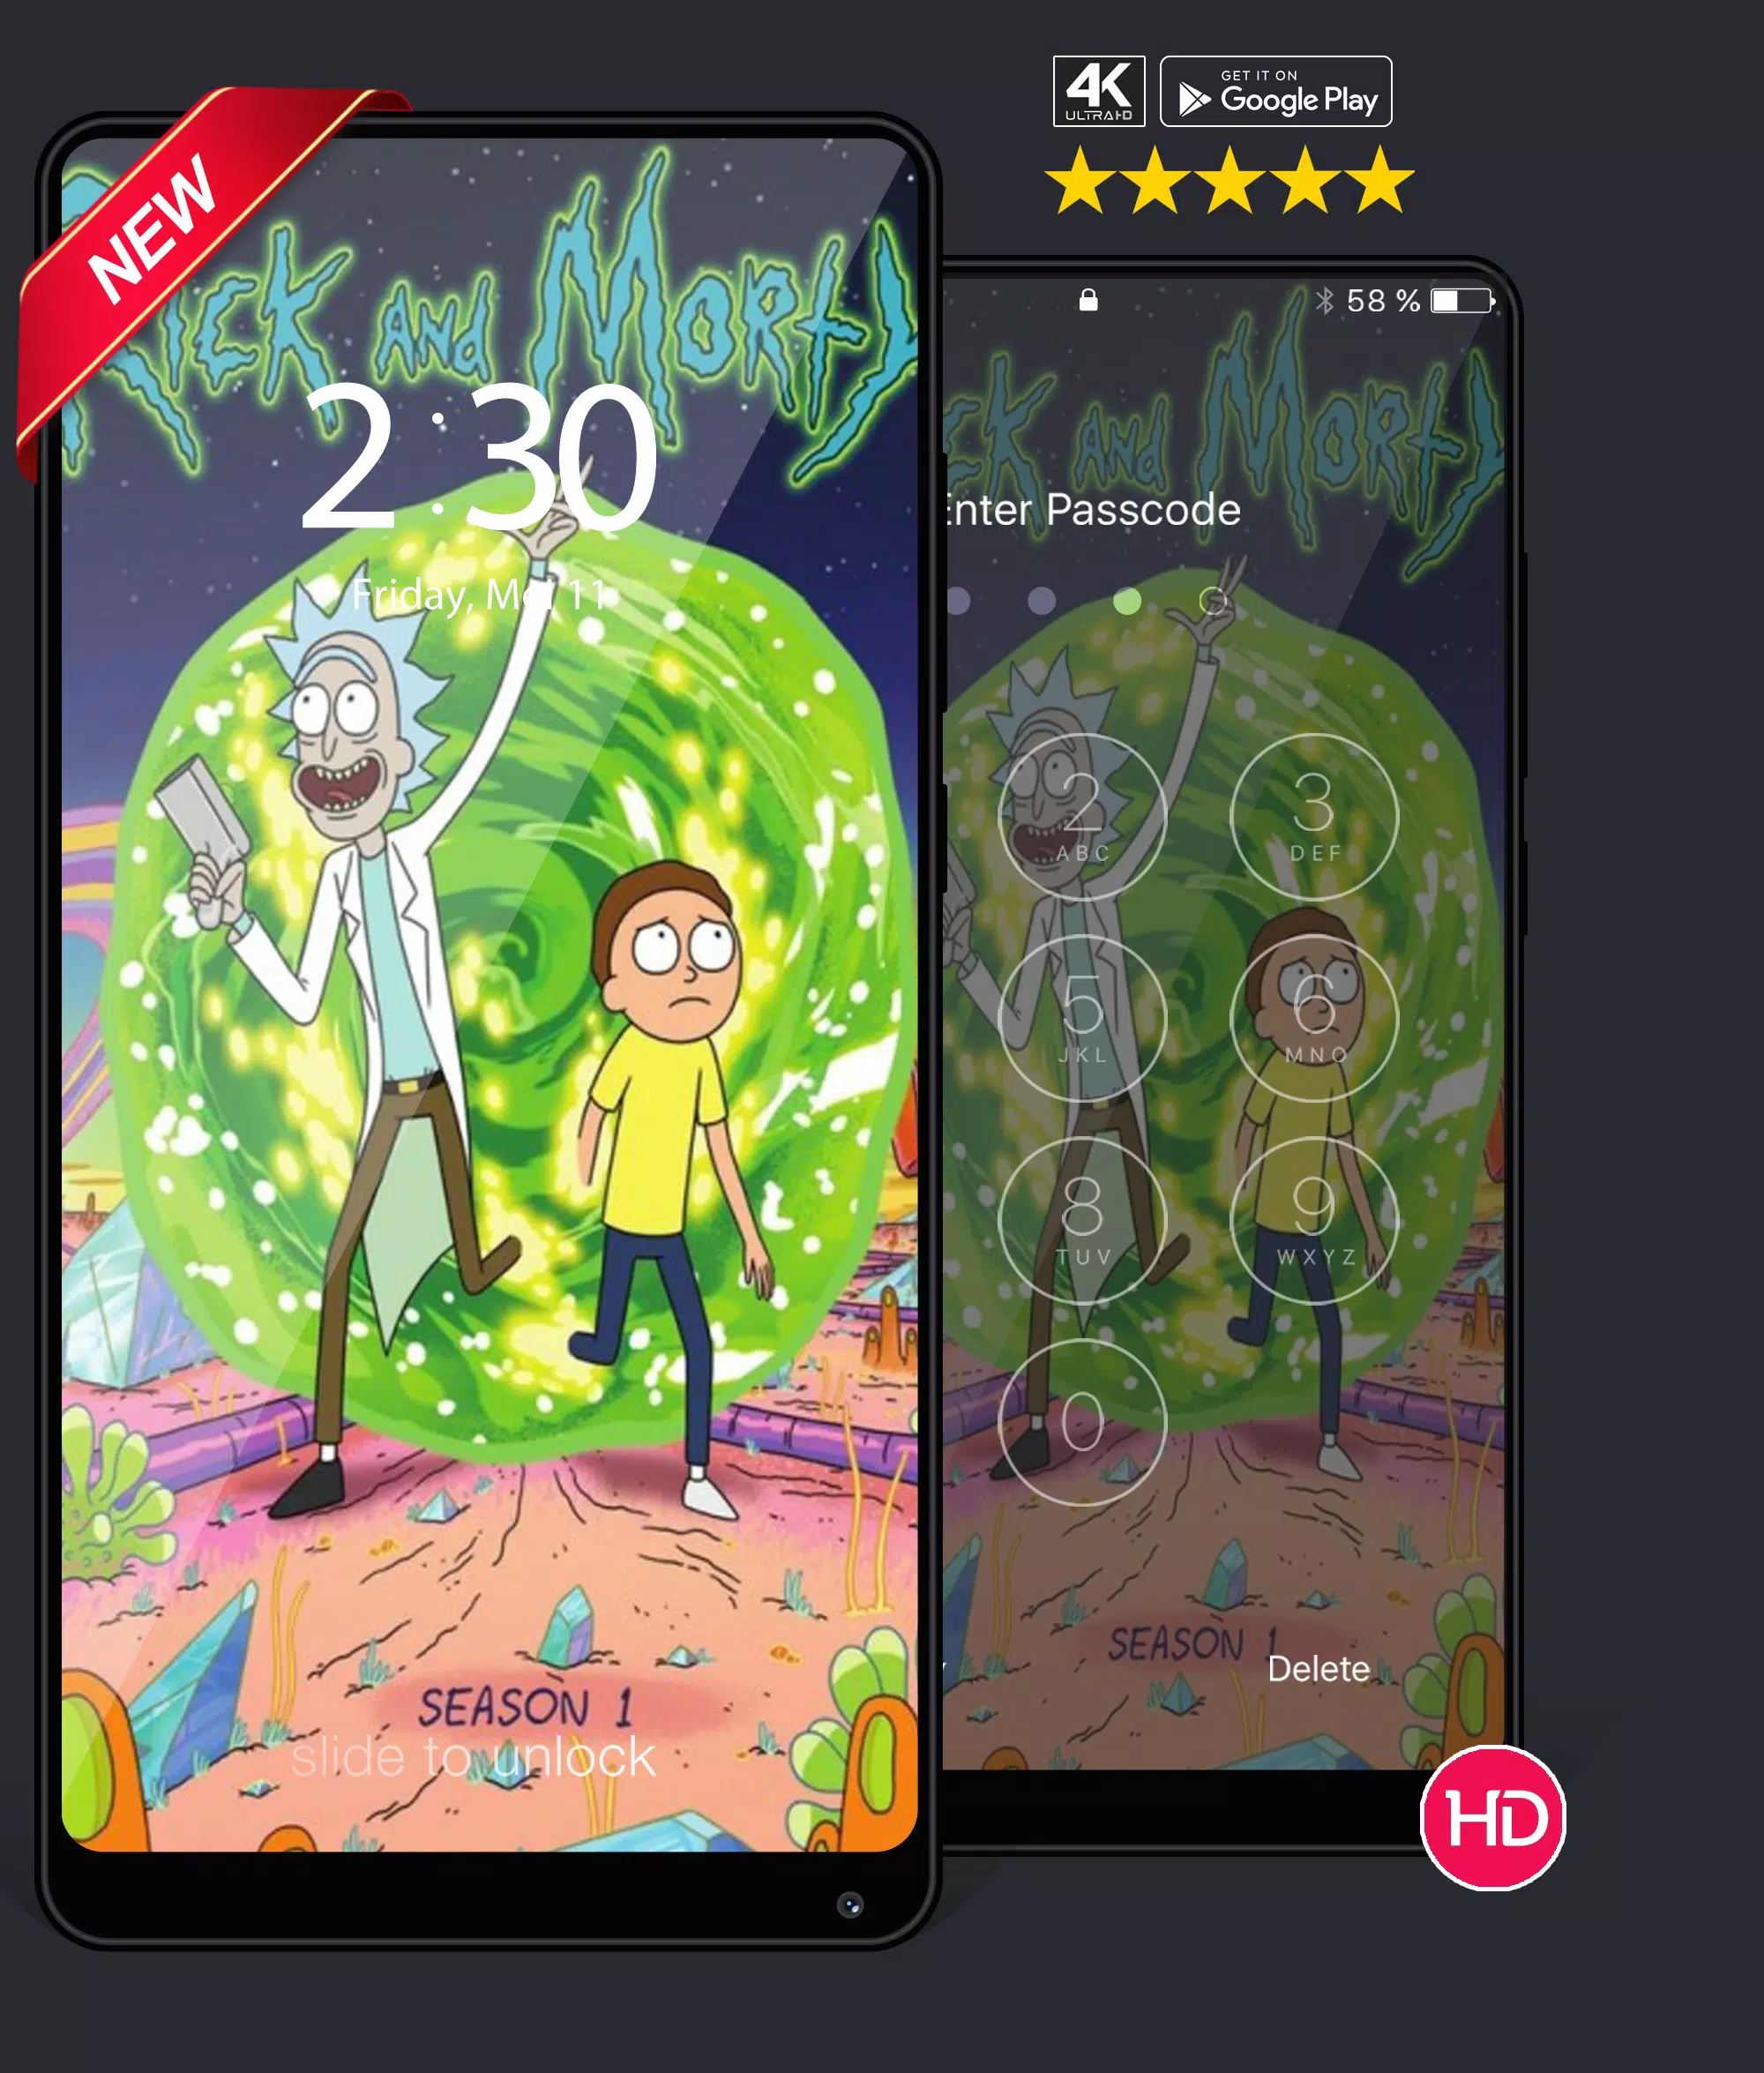 Rick and Morty 4K Wallpaper - Apps on Google Play